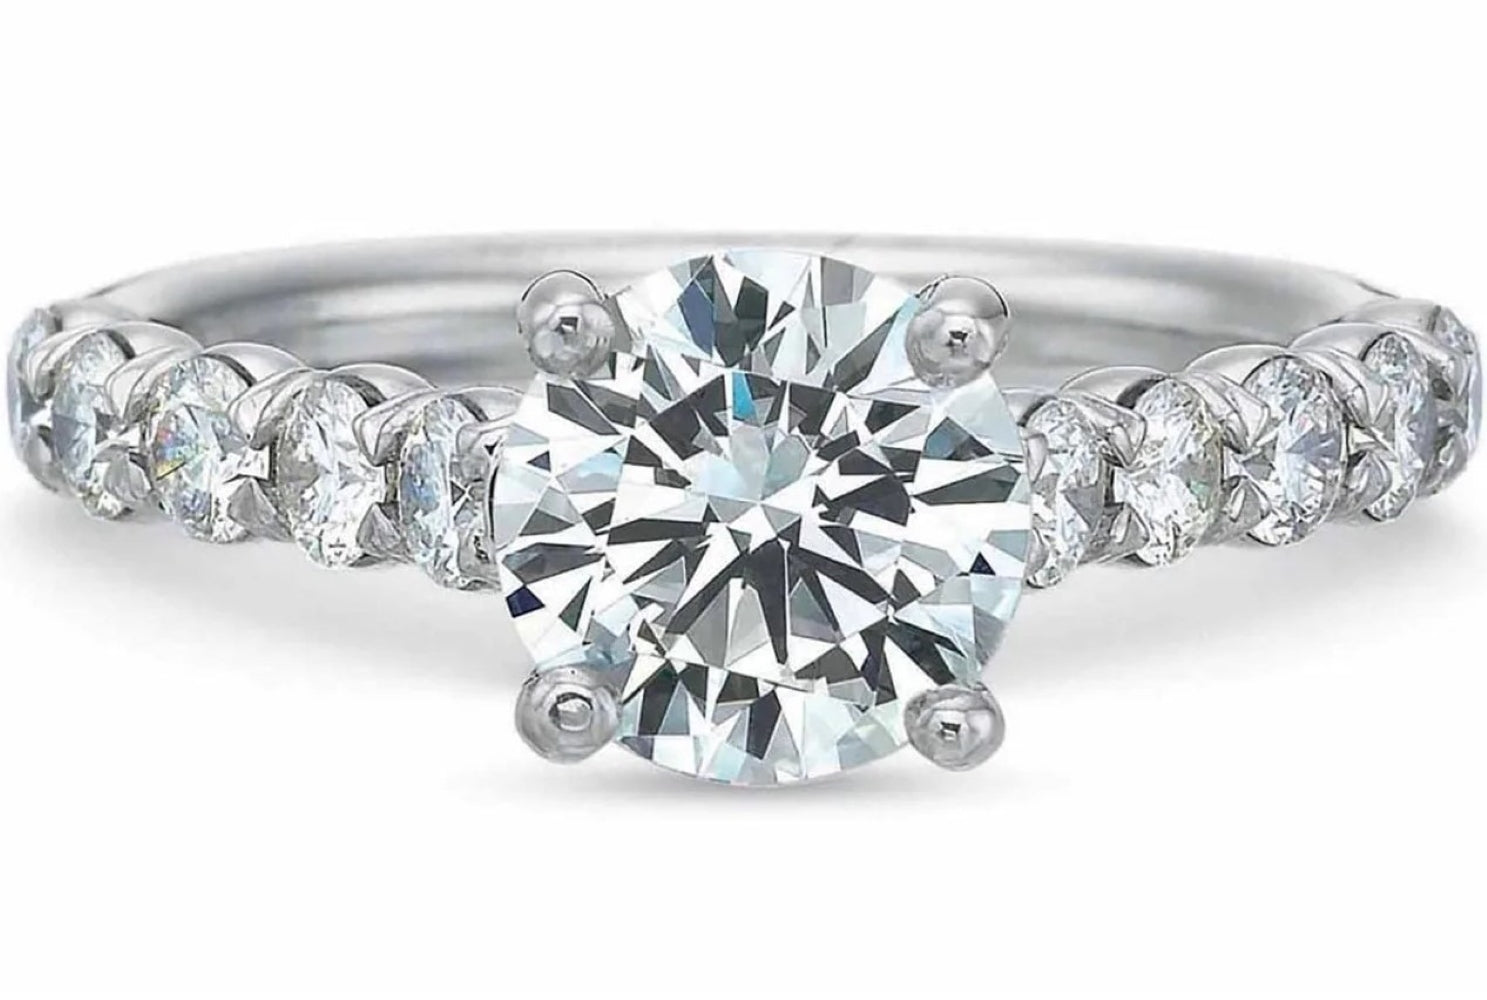 Shop Diamond Engagement Rings and Wedding Rings at Diamond Cellar Columbus. Visit Our Easton Town Center Showroom or Schedule an Appointment Today.